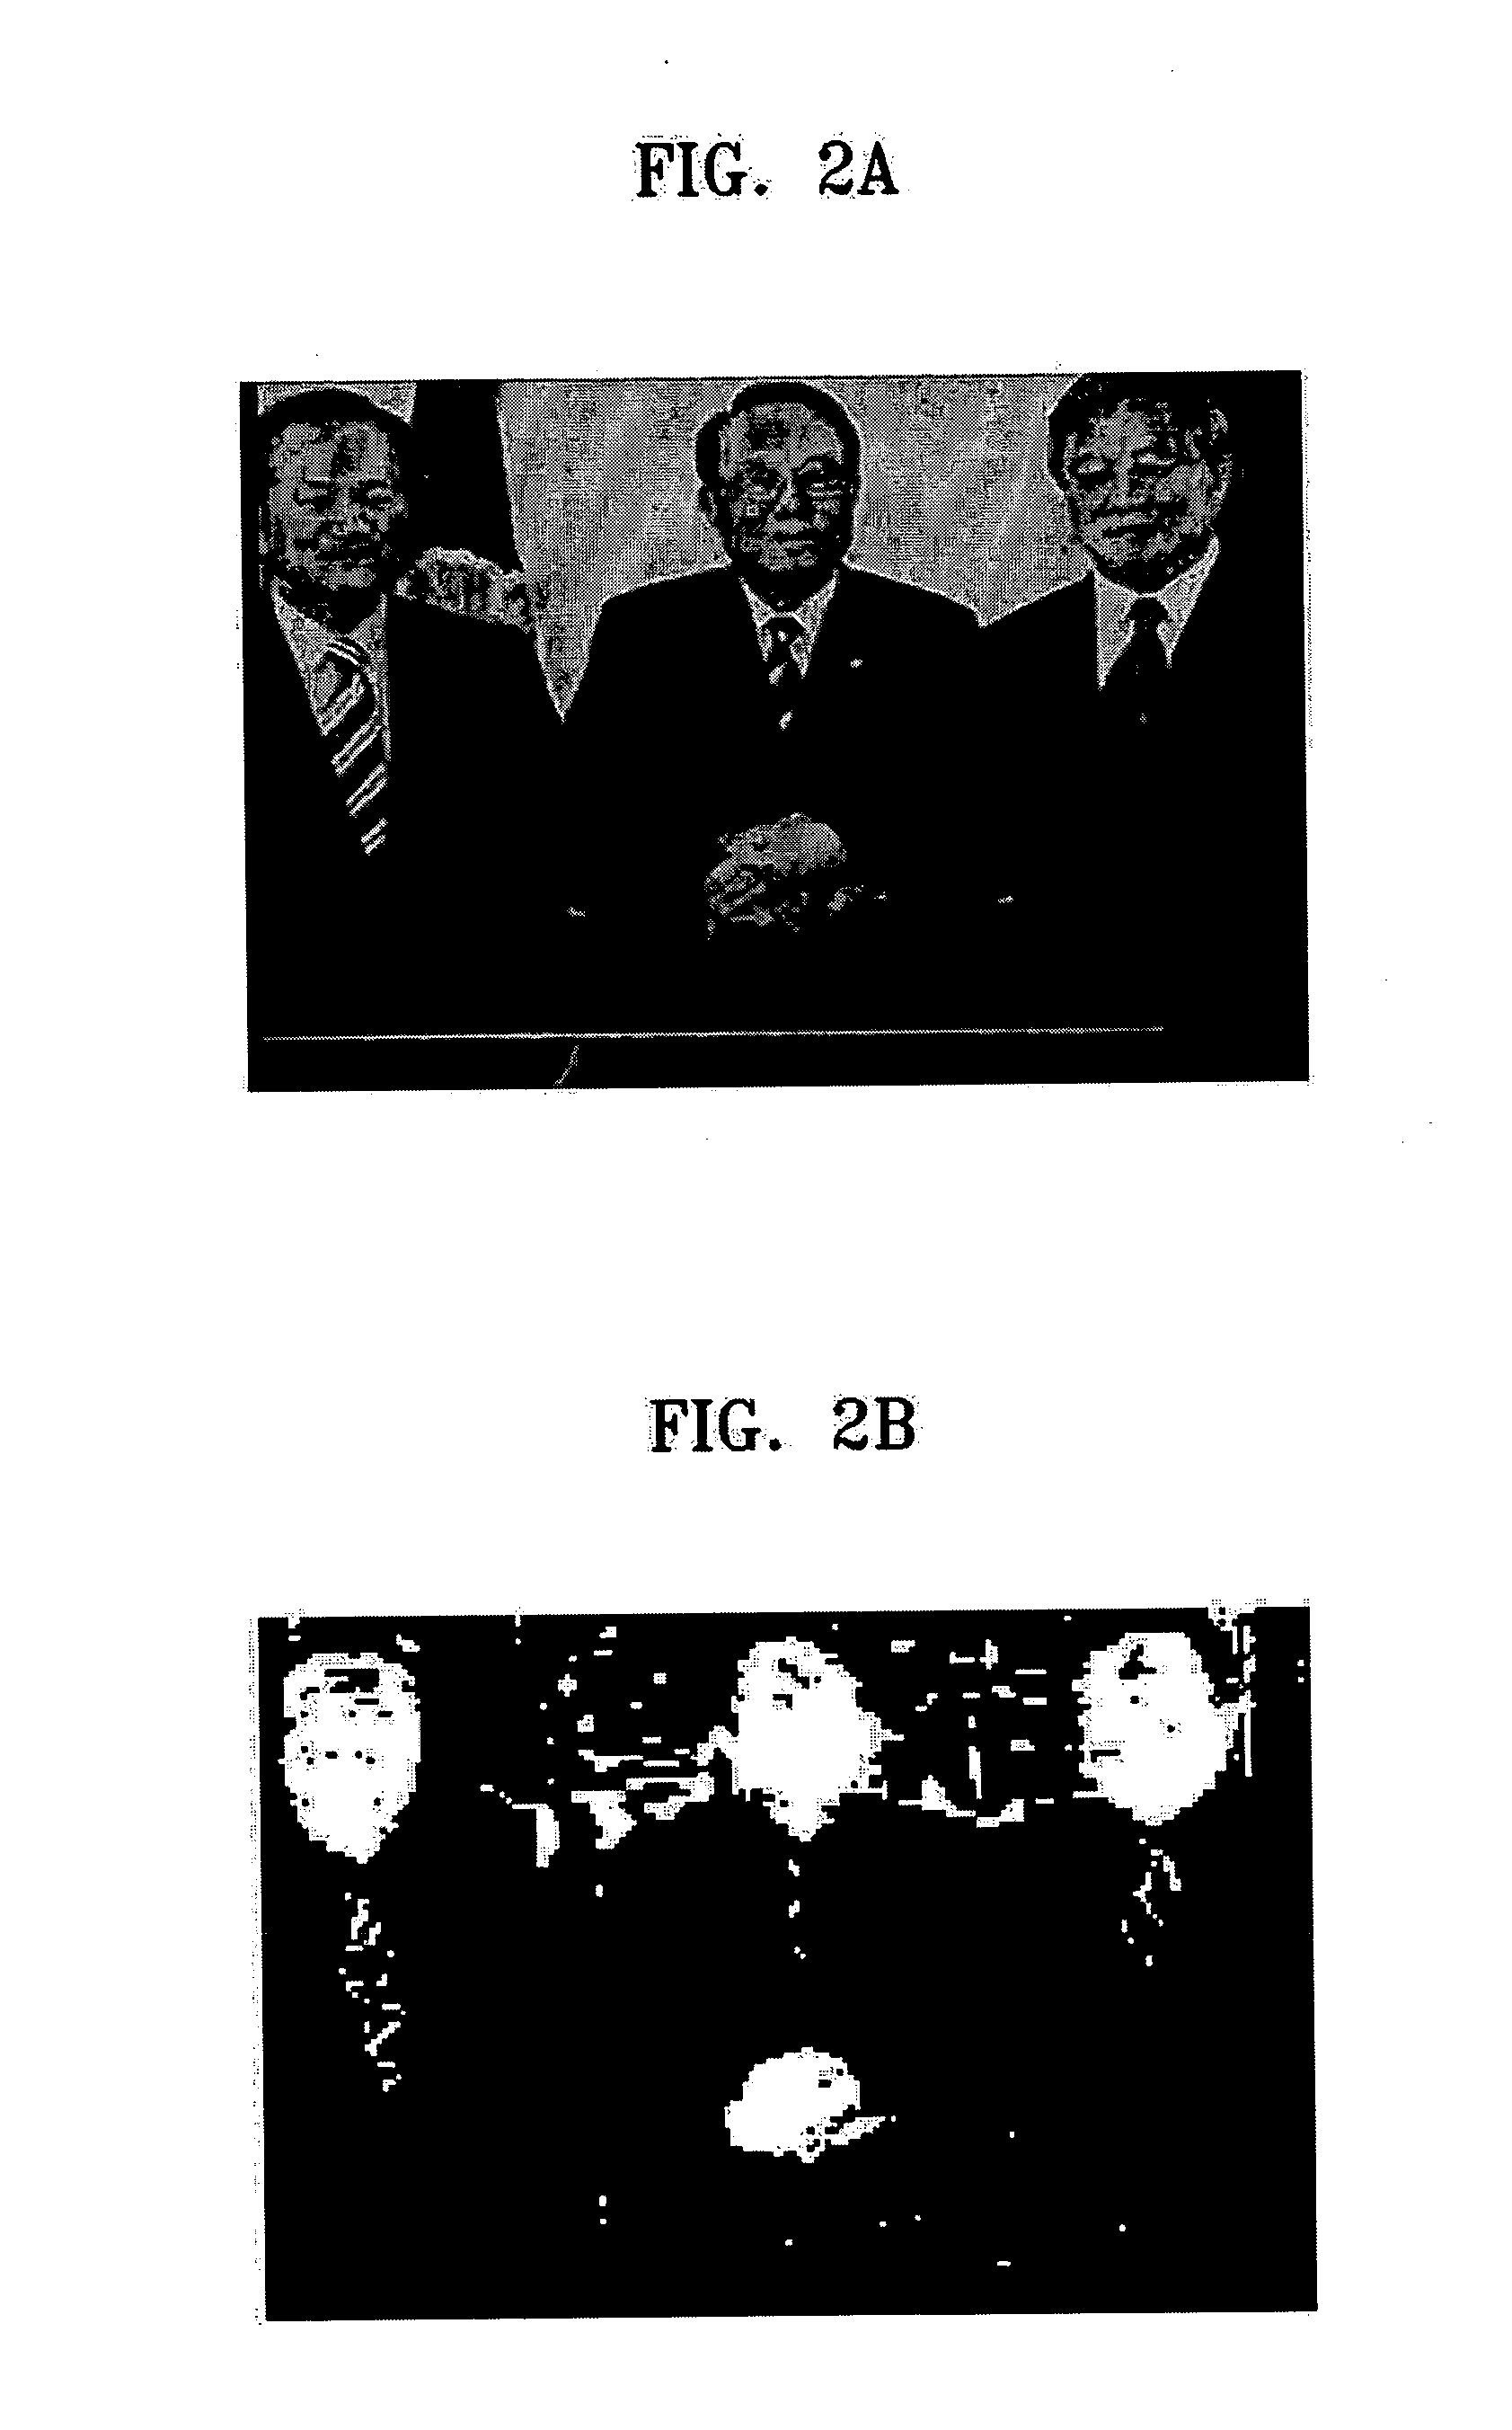 Face detection method based on skin color and pattern match